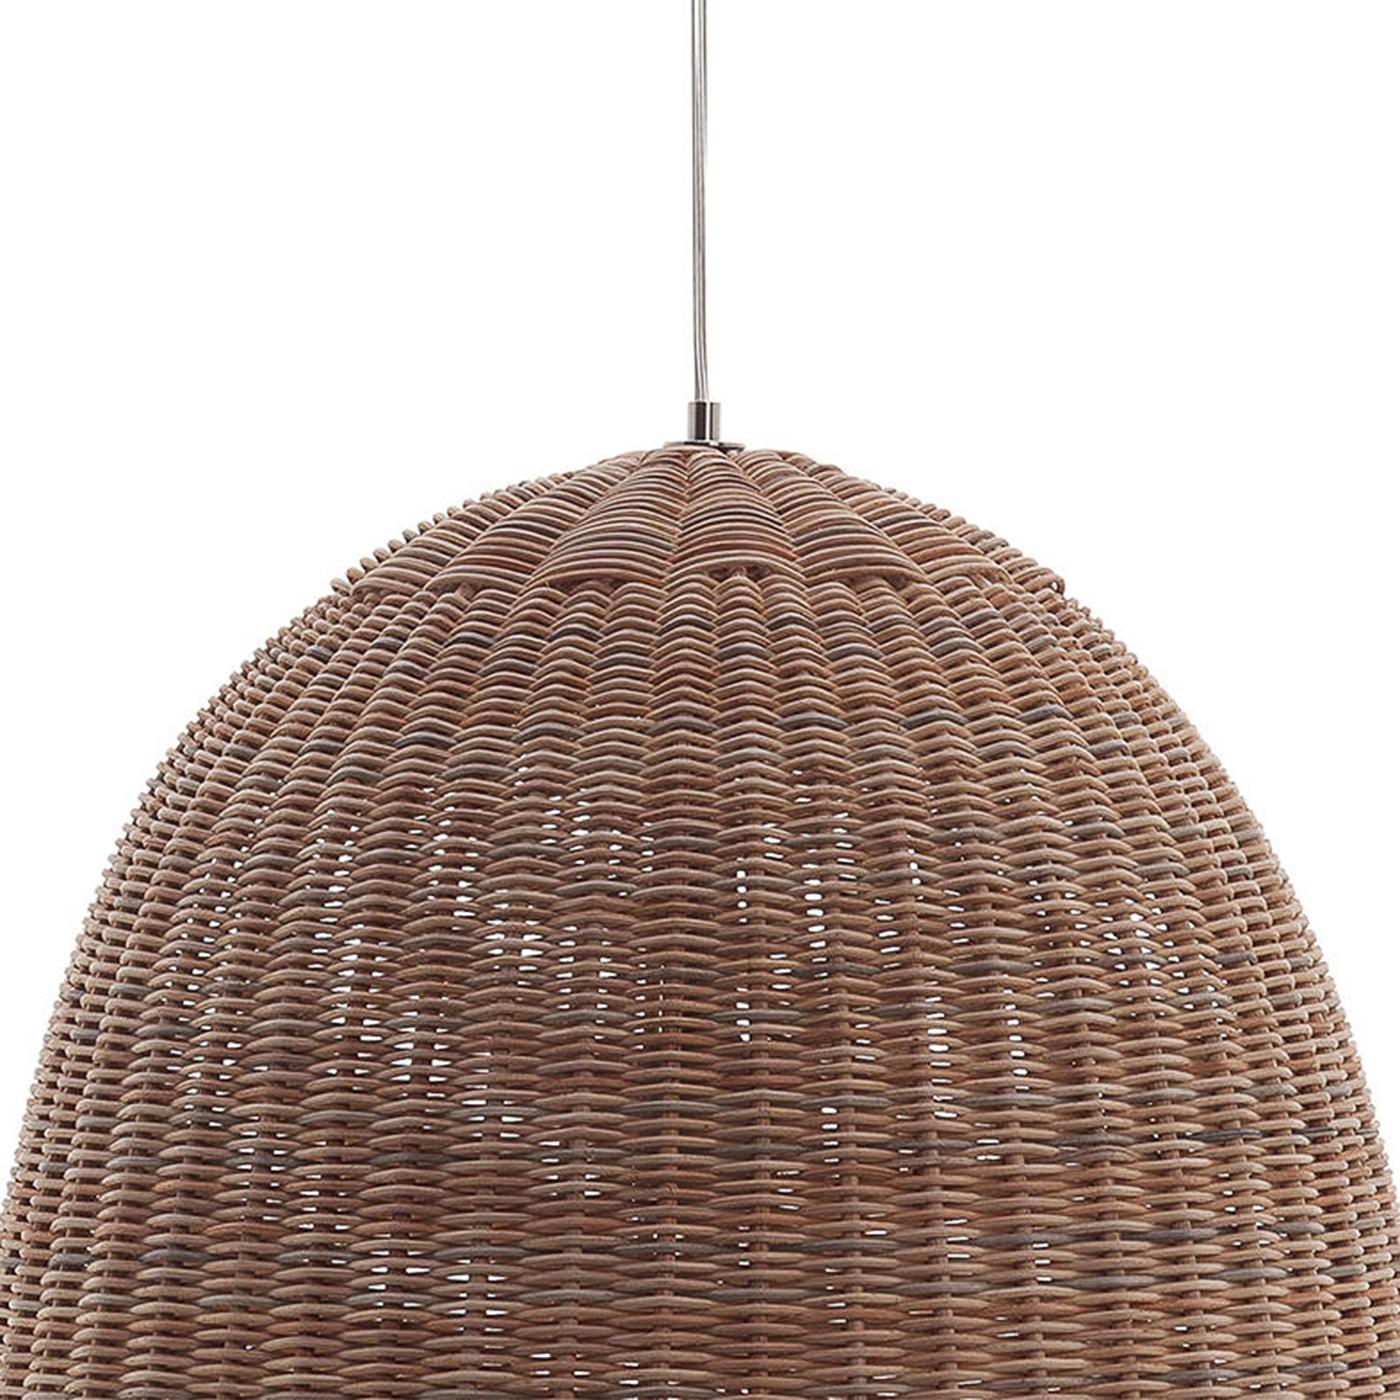 Suspension Esther Natural Brown all in handwoven rattan core,
in natural brown finish. 1 bulb, lamp holder type E27, max. 20 Watts, 
220 Volt, bulb not included. With electrical cable 200 cm and 
with steel cable 200 cm.